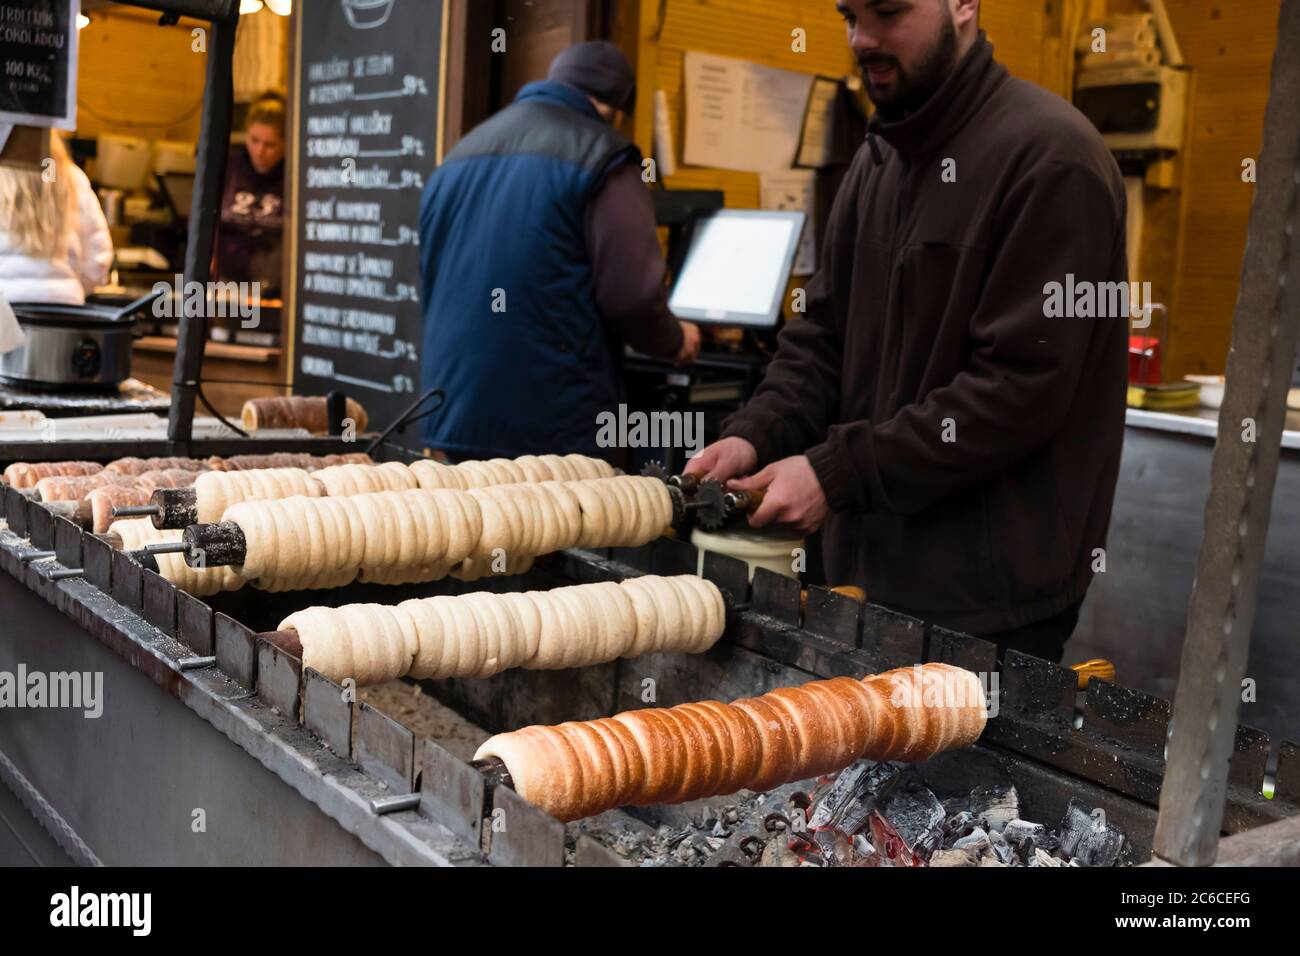 Street food vendors grill Trdelnik, a traditional sweet pastry, at a Christmas market at Prague Castle Stock Photo